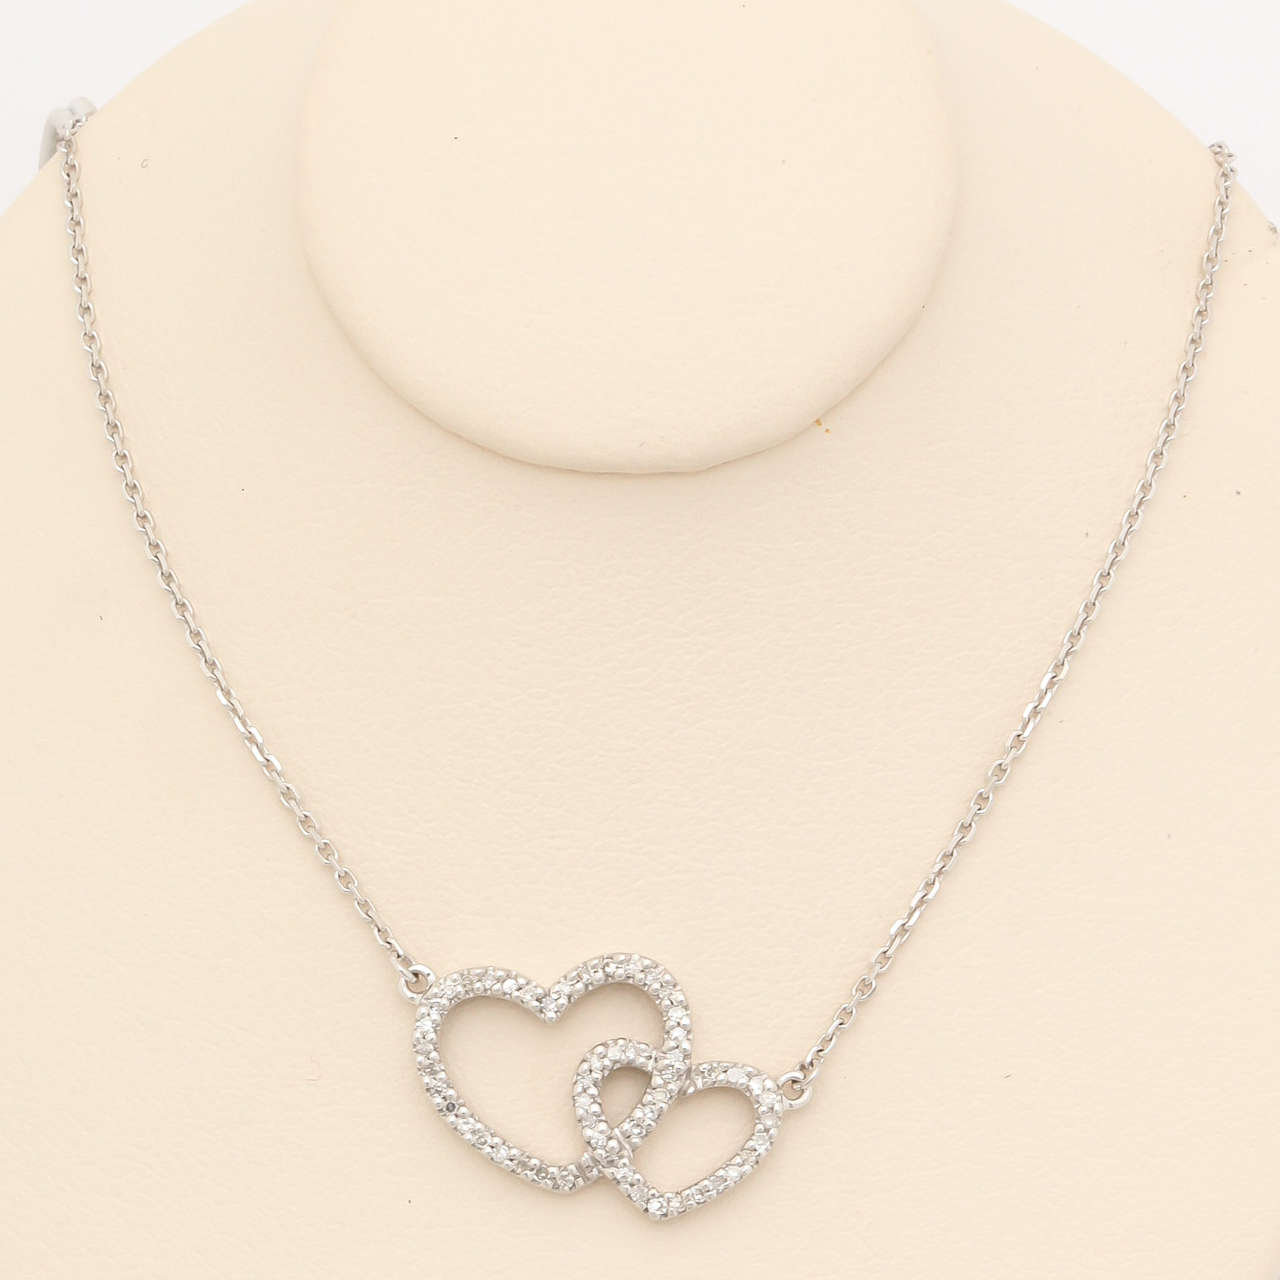 What a charming gift for Valentines Day. This 14 kt white gold and 0.17 ct diamond pendant is a wonderful token of your love. Your lives are intertwined for eternity.The chain is 16.5 in. 14 kt white gold cable-link made in Italy. A perfect memento